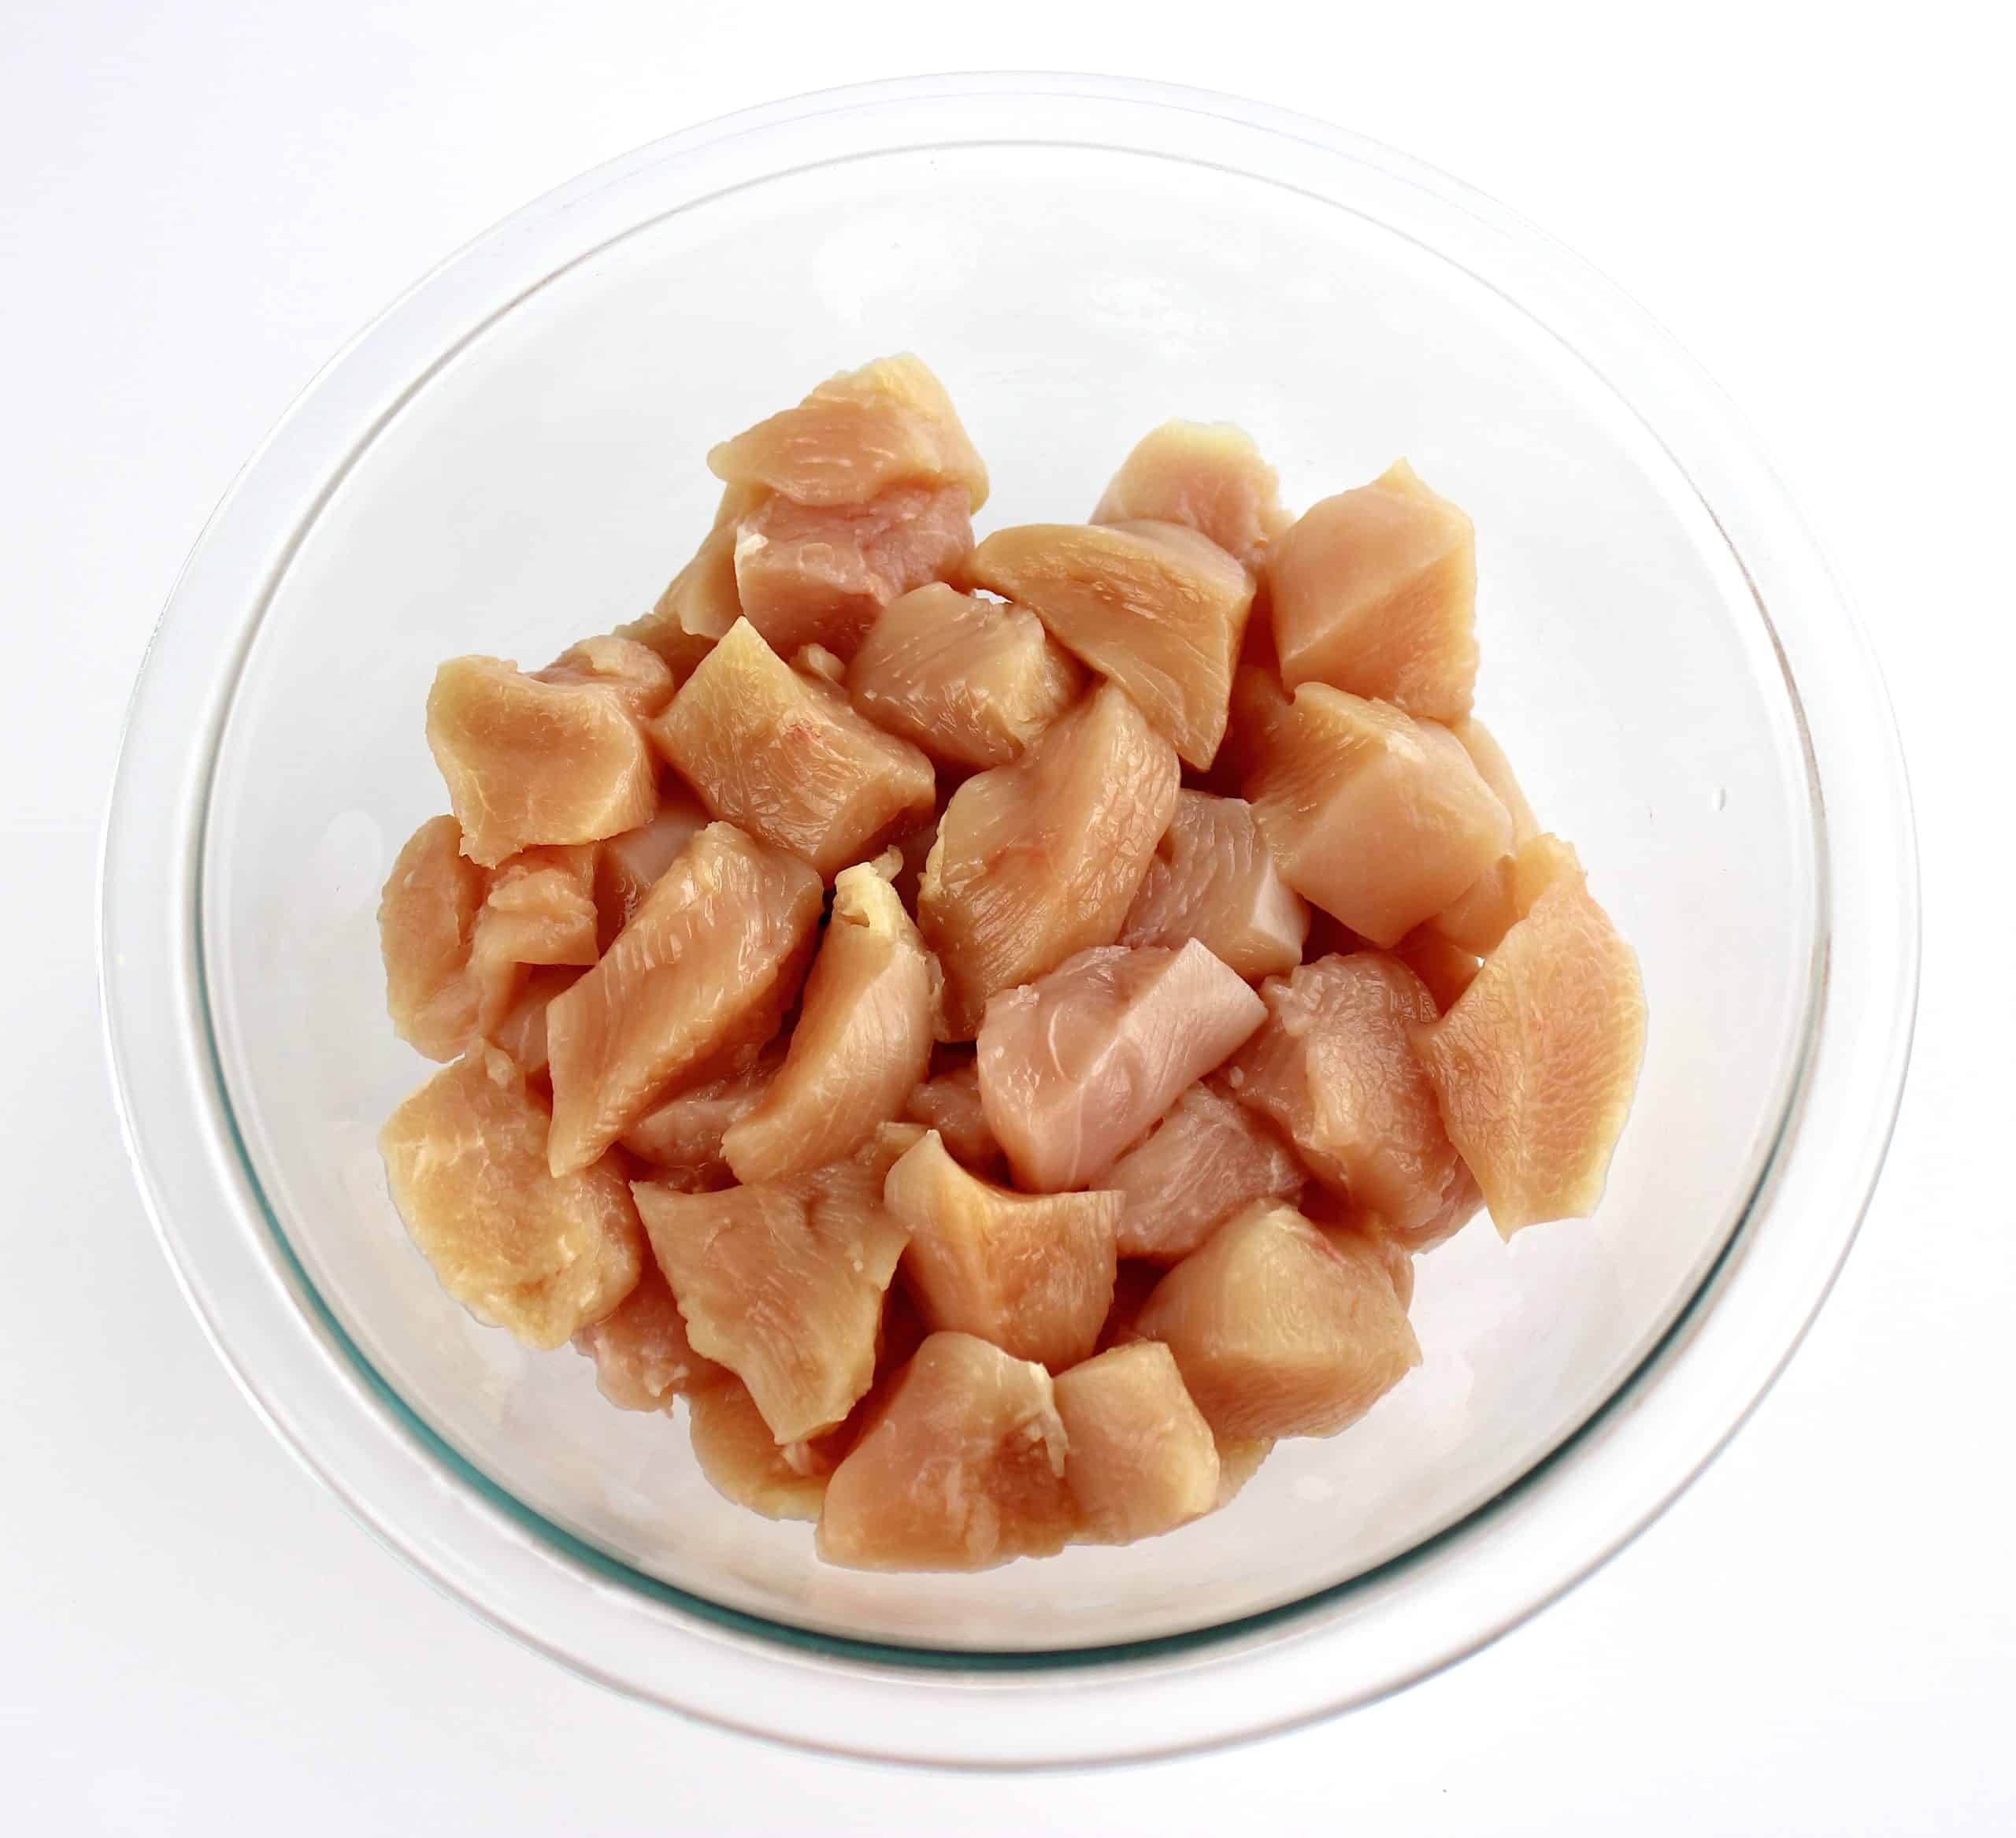 chunks of raw chicken pieces in glass bowl